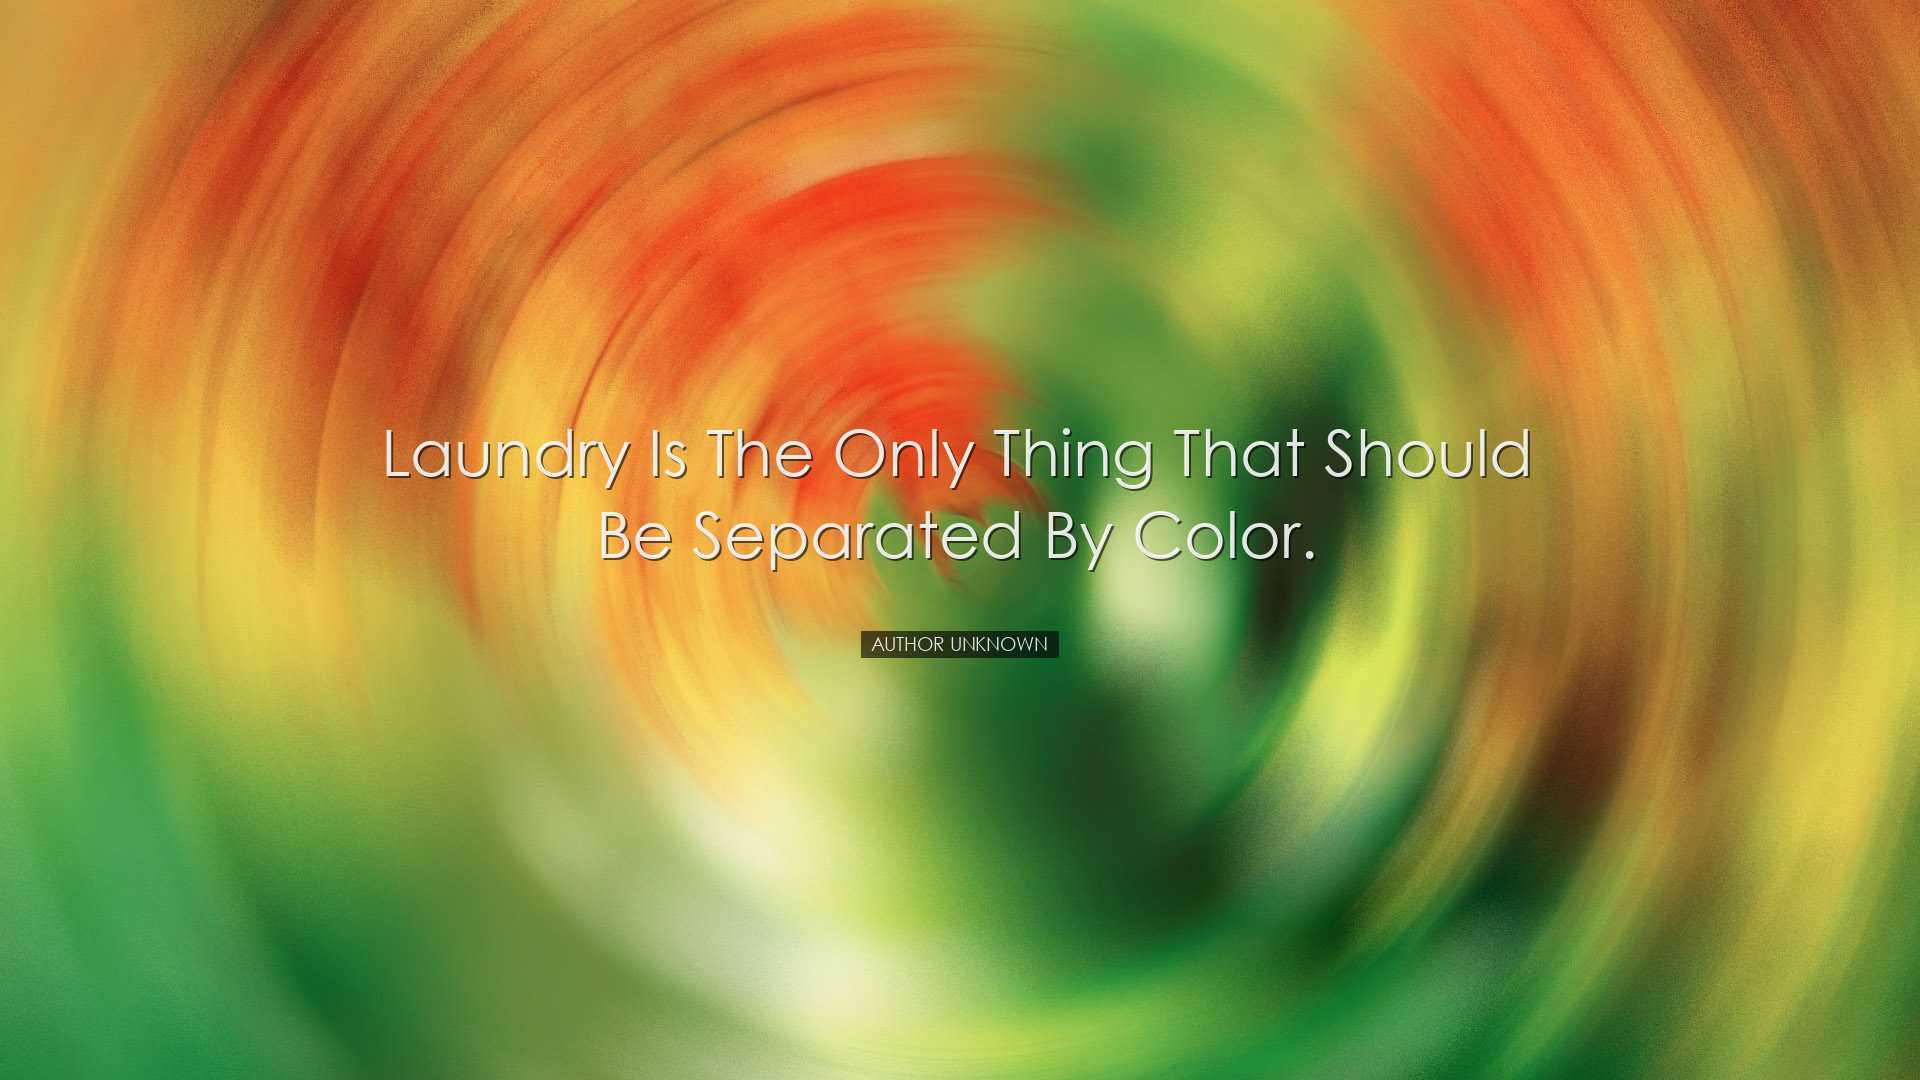 Laundry is the only thing that should be separated by color. - Aut